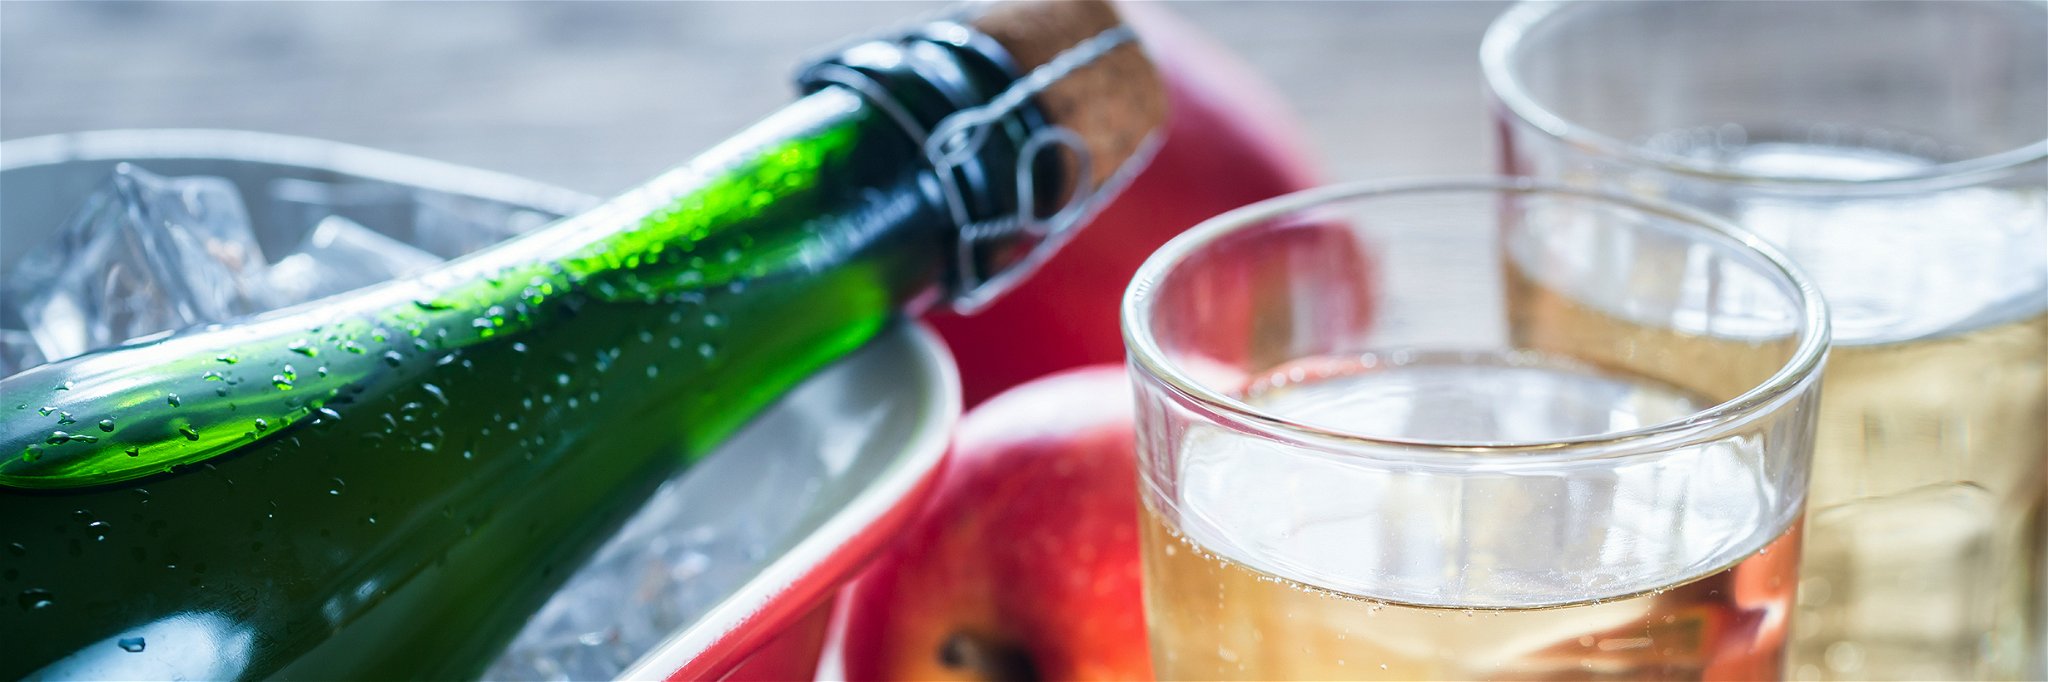 Cider can make a very respectable mealtime stand-in for wine.